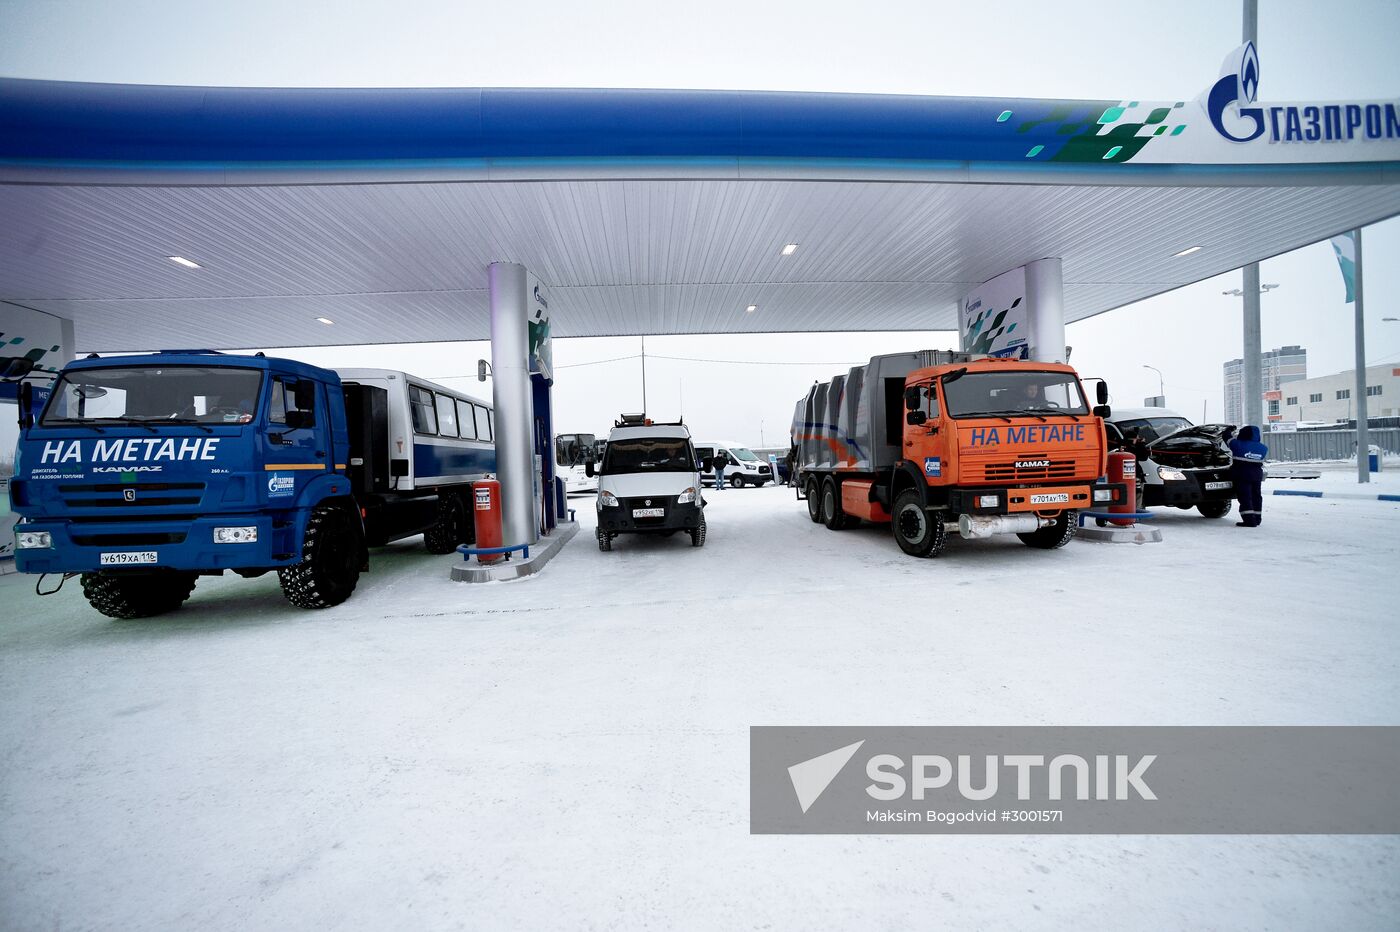 Natural gas fueling stations open in Kazan